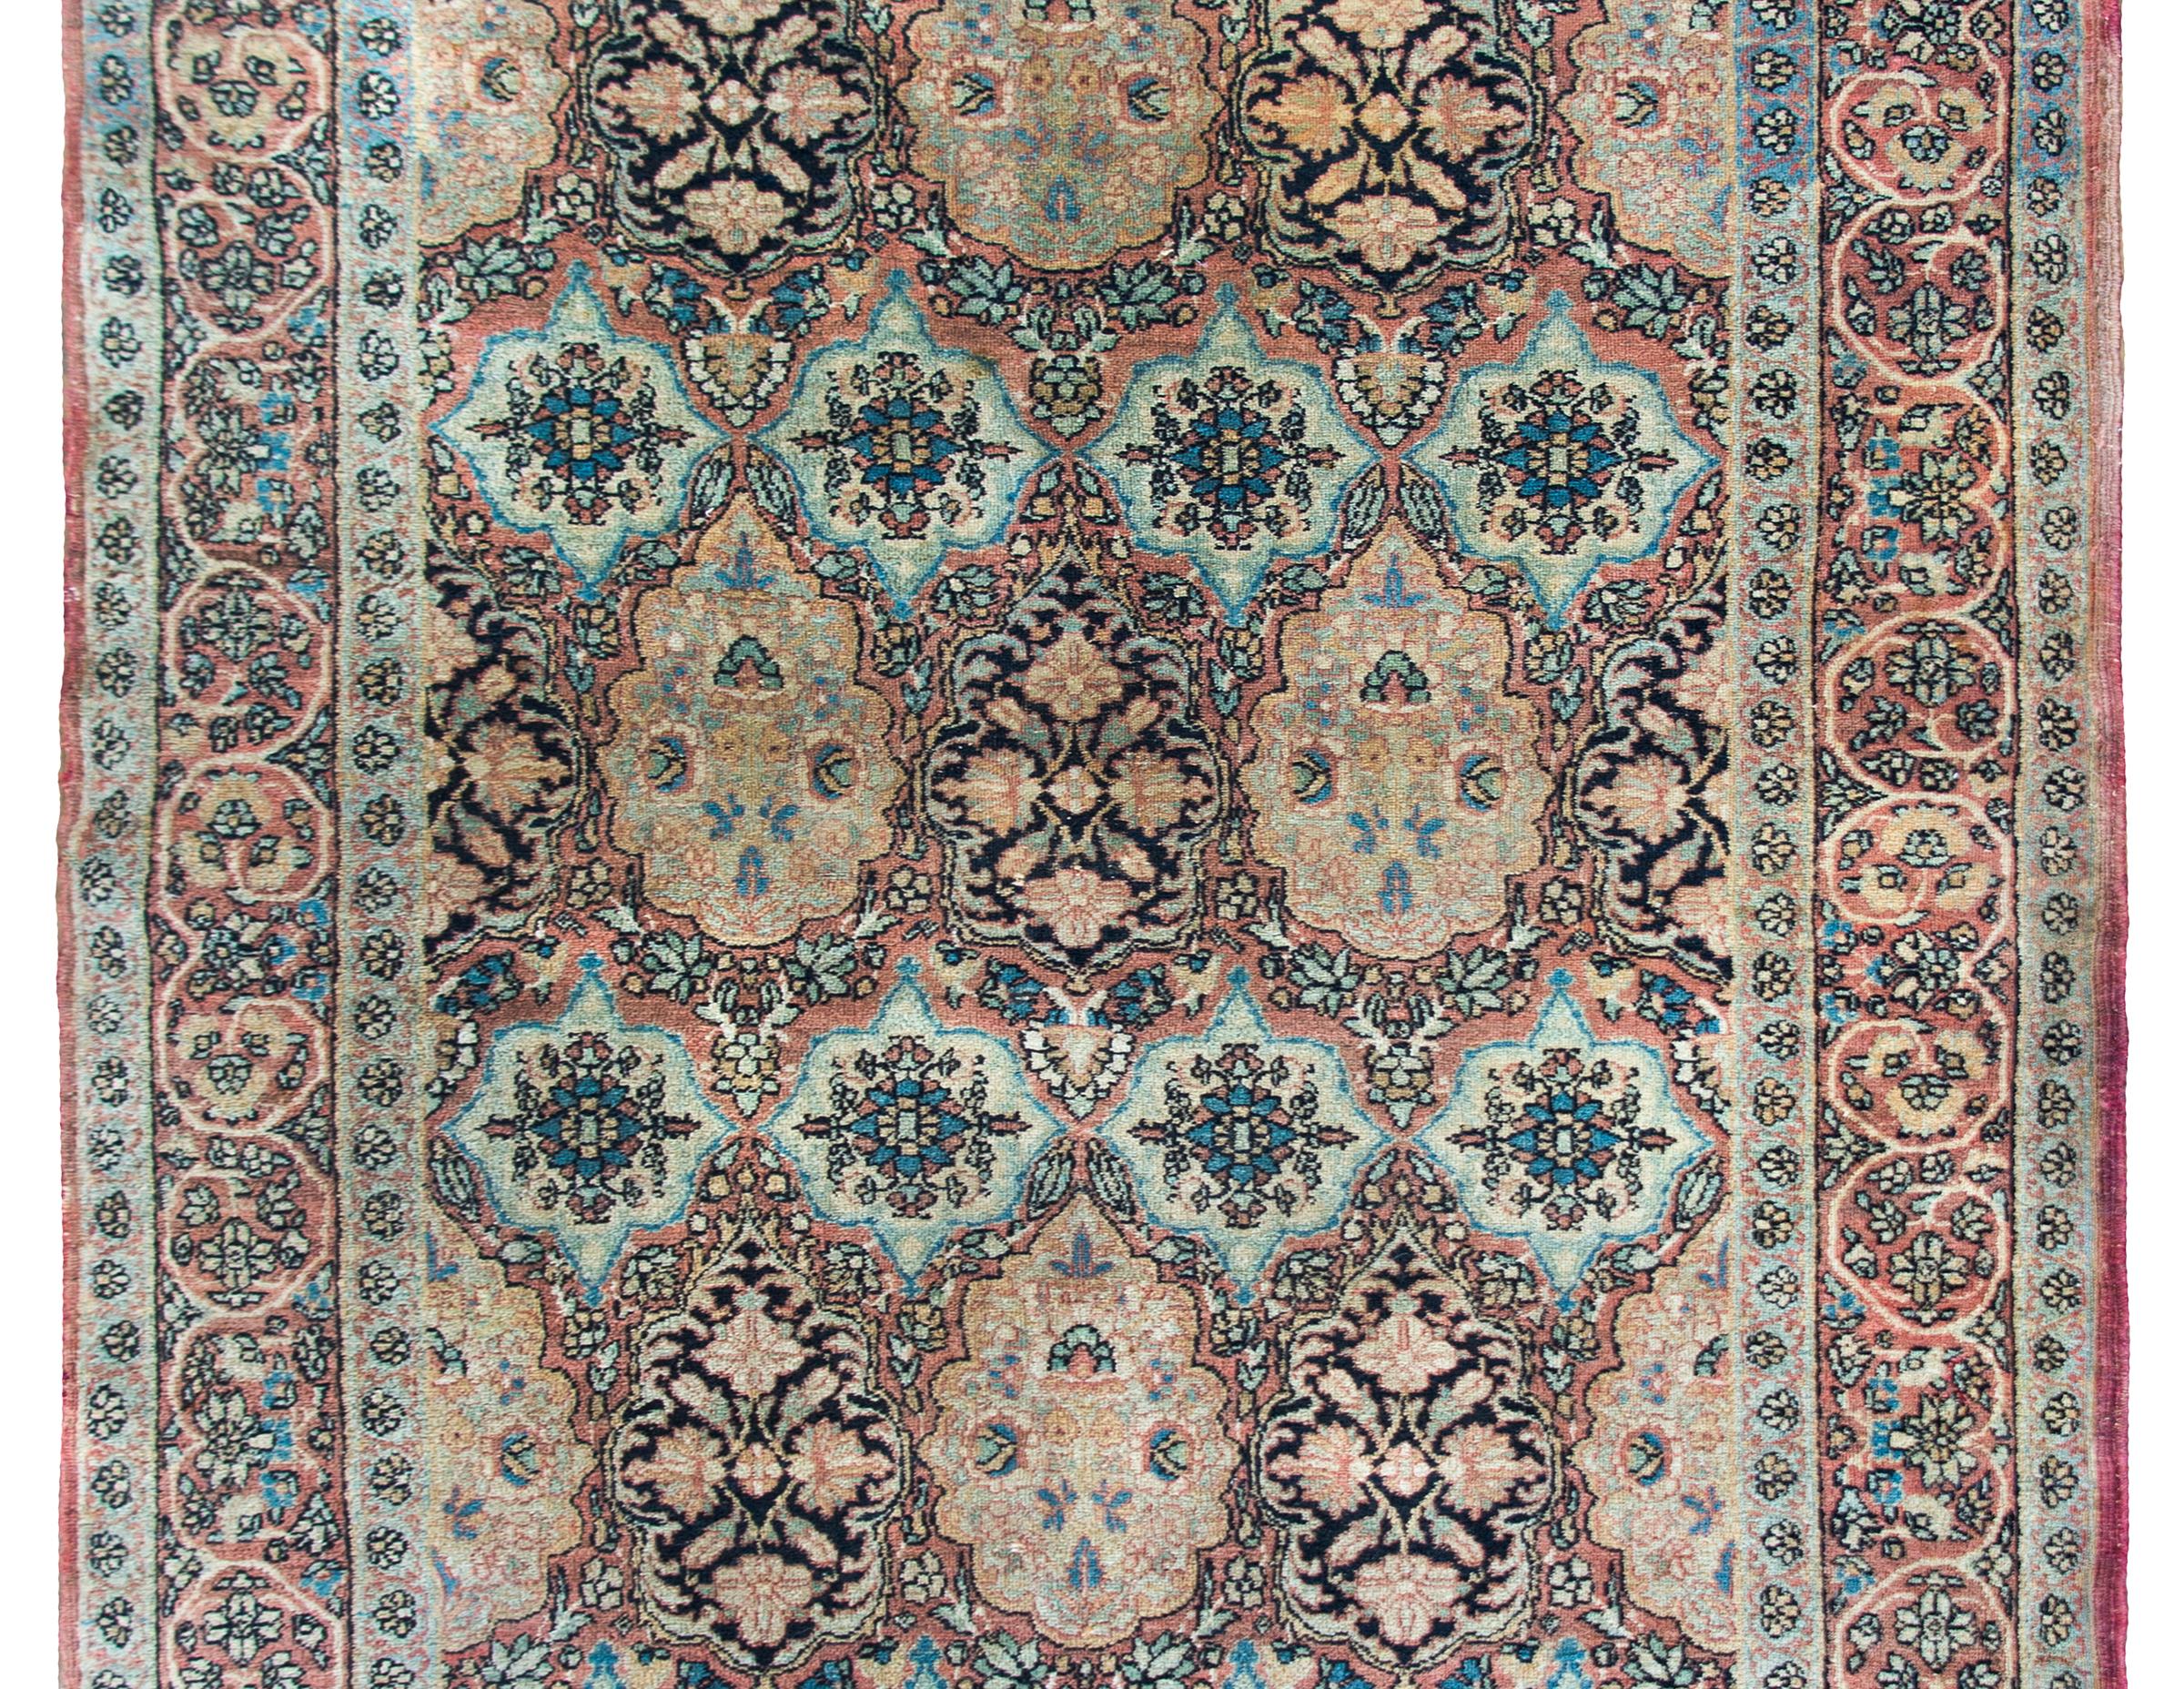 A wonderful early 20th century Persian Lavar Kirman rug with several floral medallions covering the field, surrounded by a wide border with more flowers and scrolling vines, and all woven in muted indigos, reds, oranges, yellows, and creams.